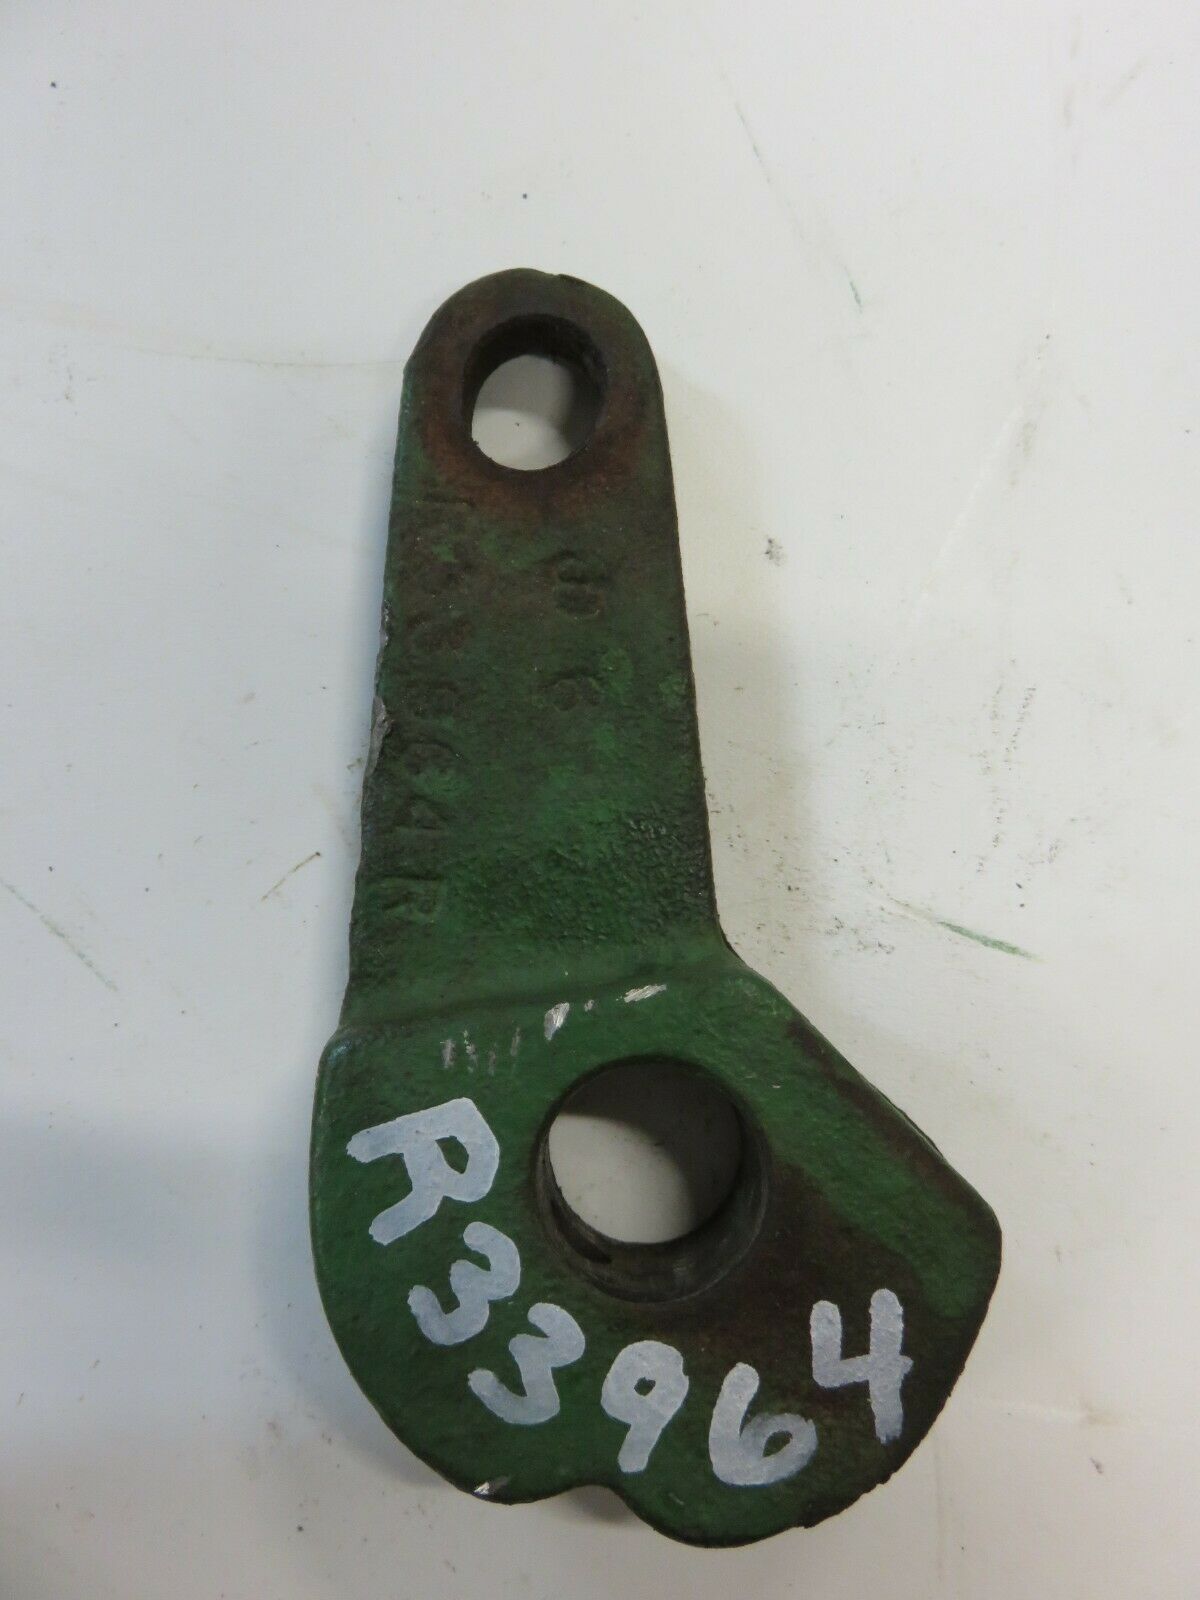 R33964 John Deere PTO Clutch Lever Arm For 3020, 4020